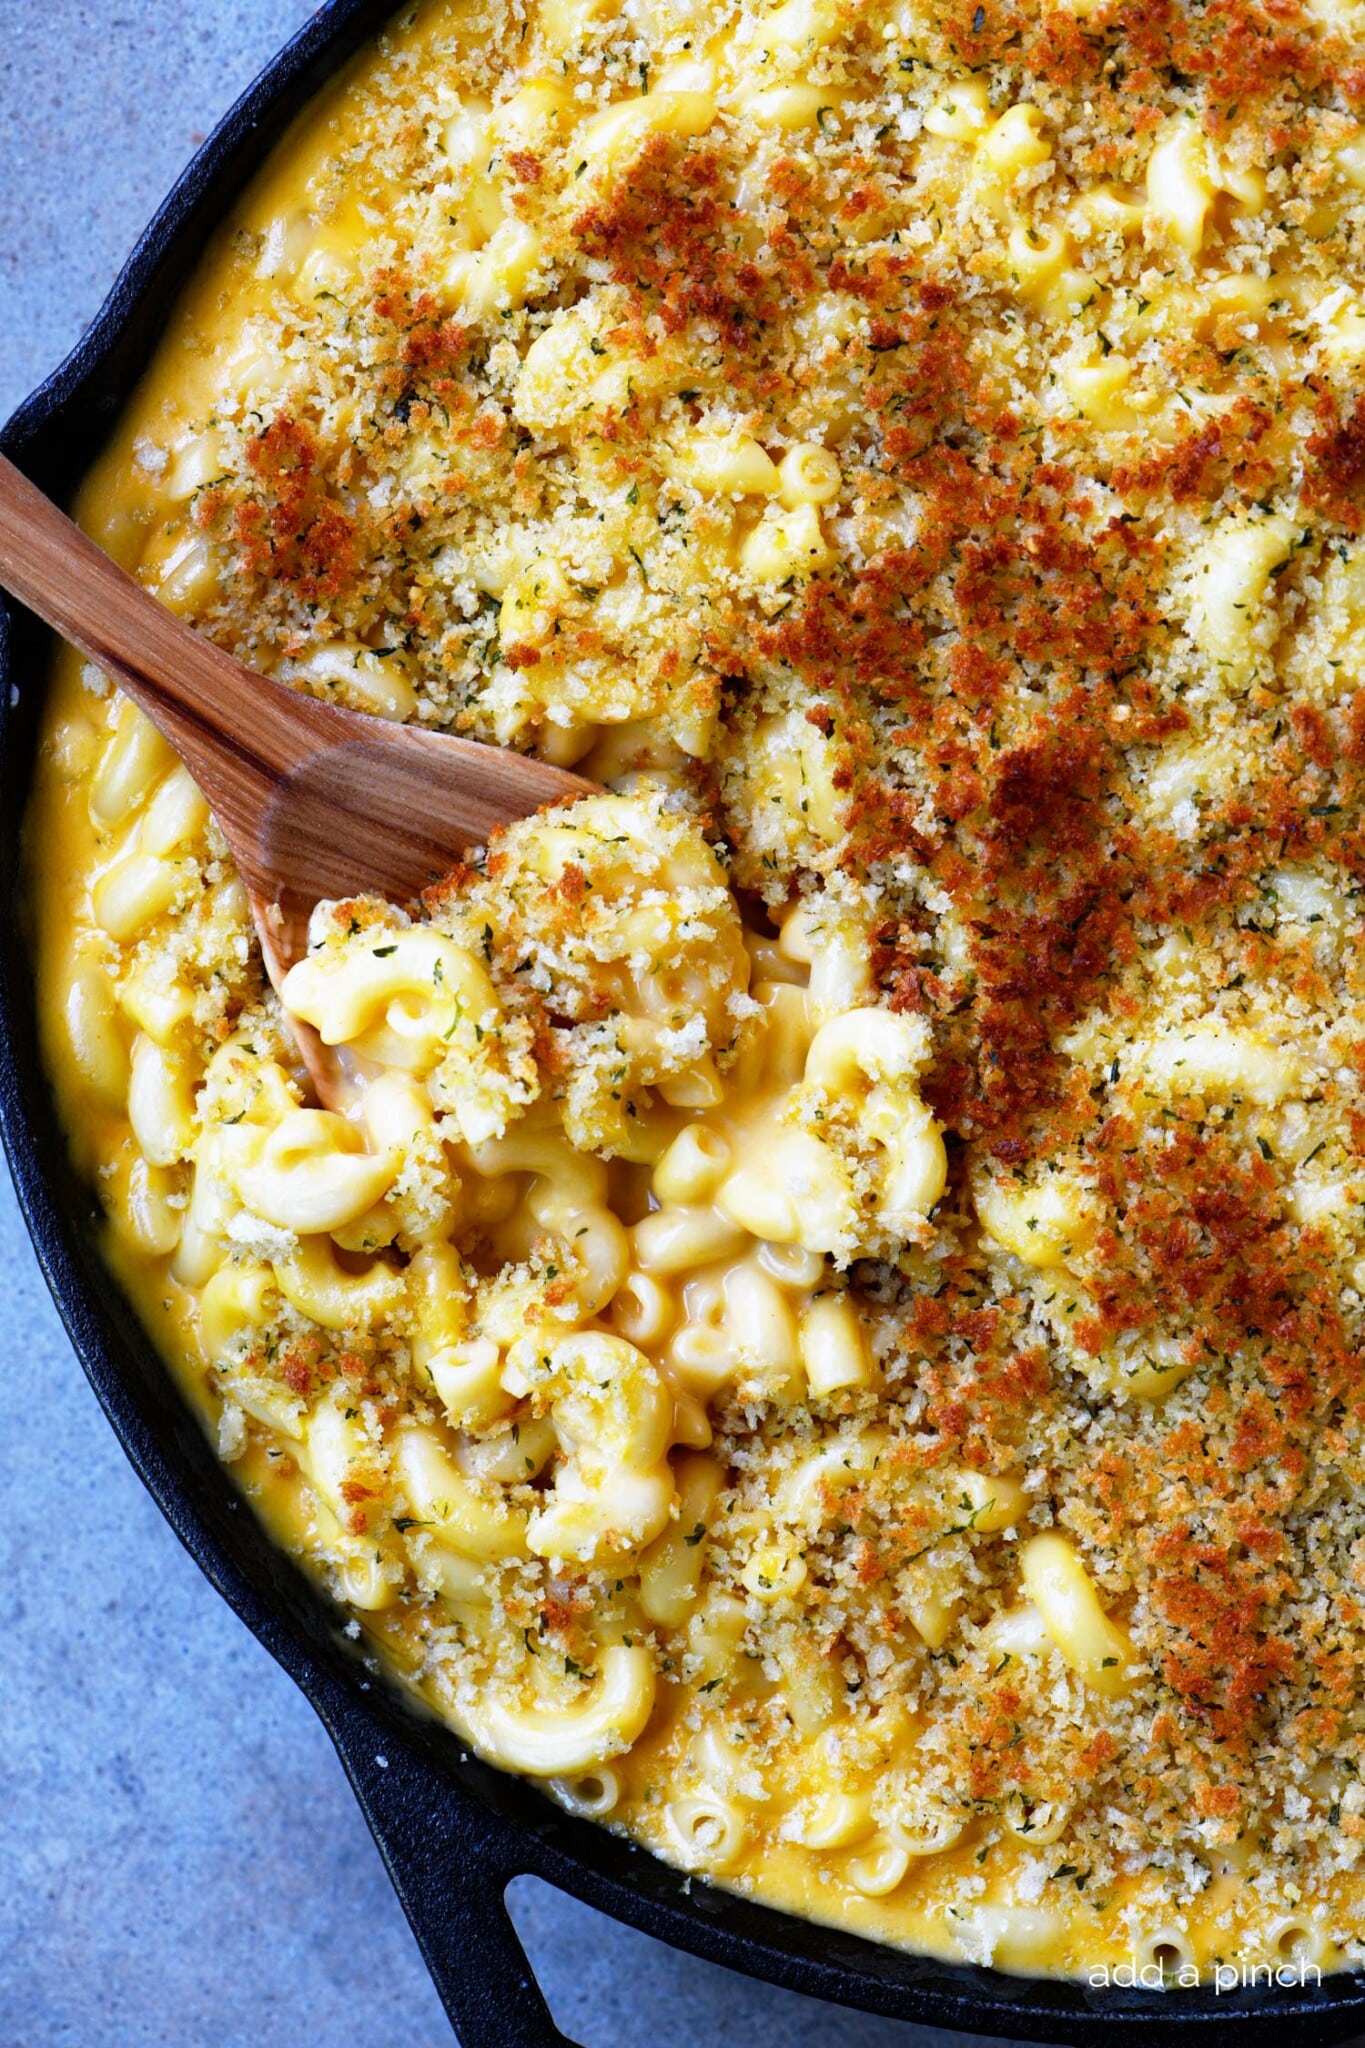 Configure Baked Mac & Cheese By The Pan - McAlister's Deli